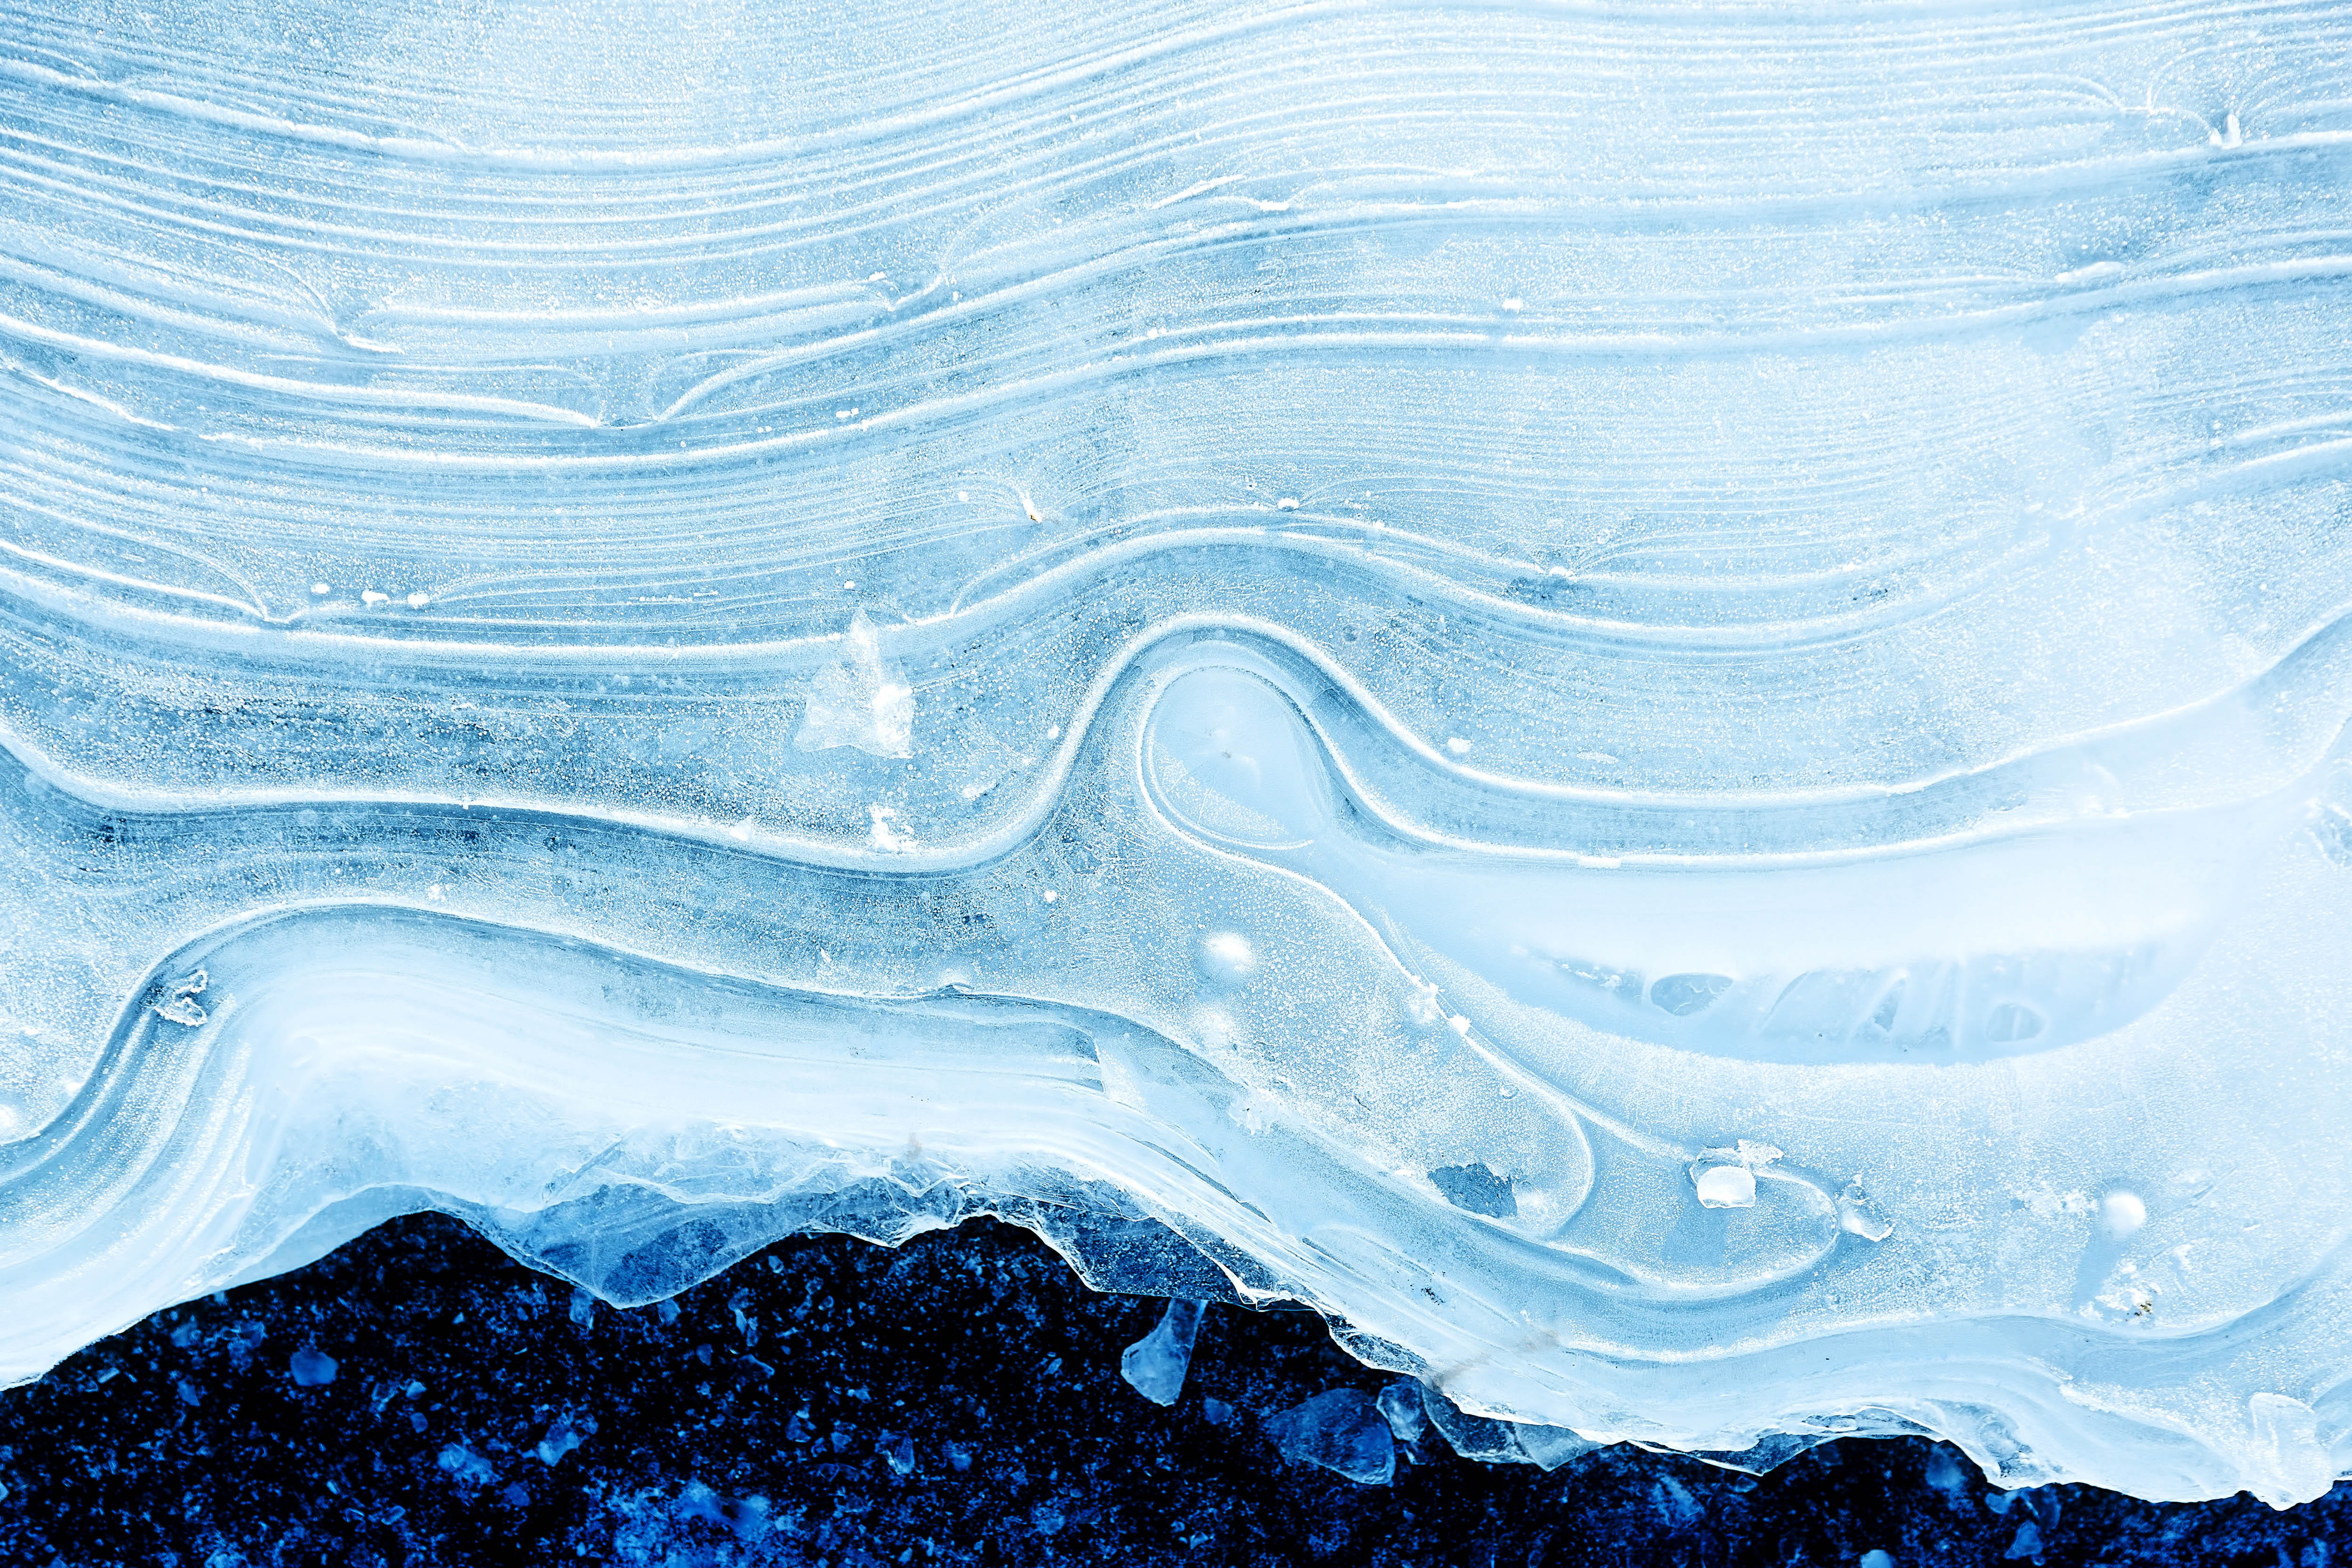 Closeup shot of winter ice texture, textures, abstract, backgrounds